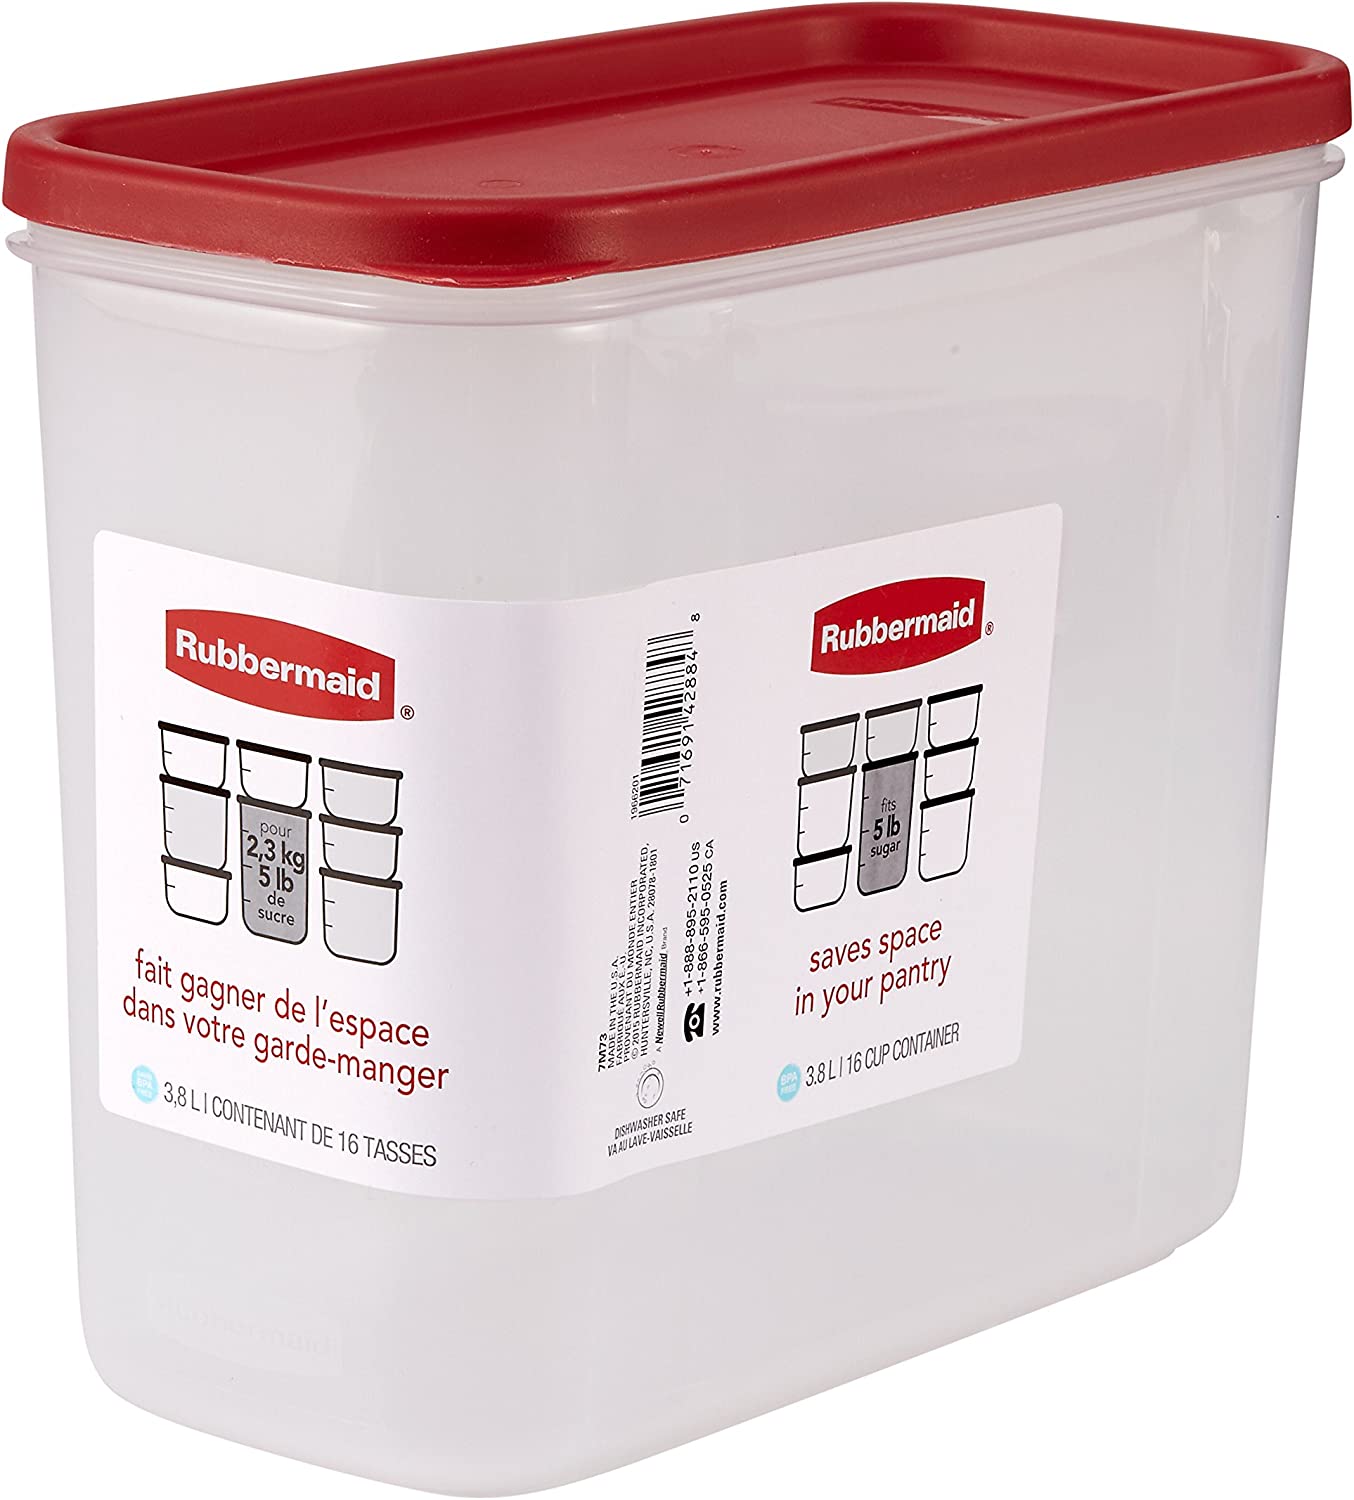 Rubbermaid pet food storage containers